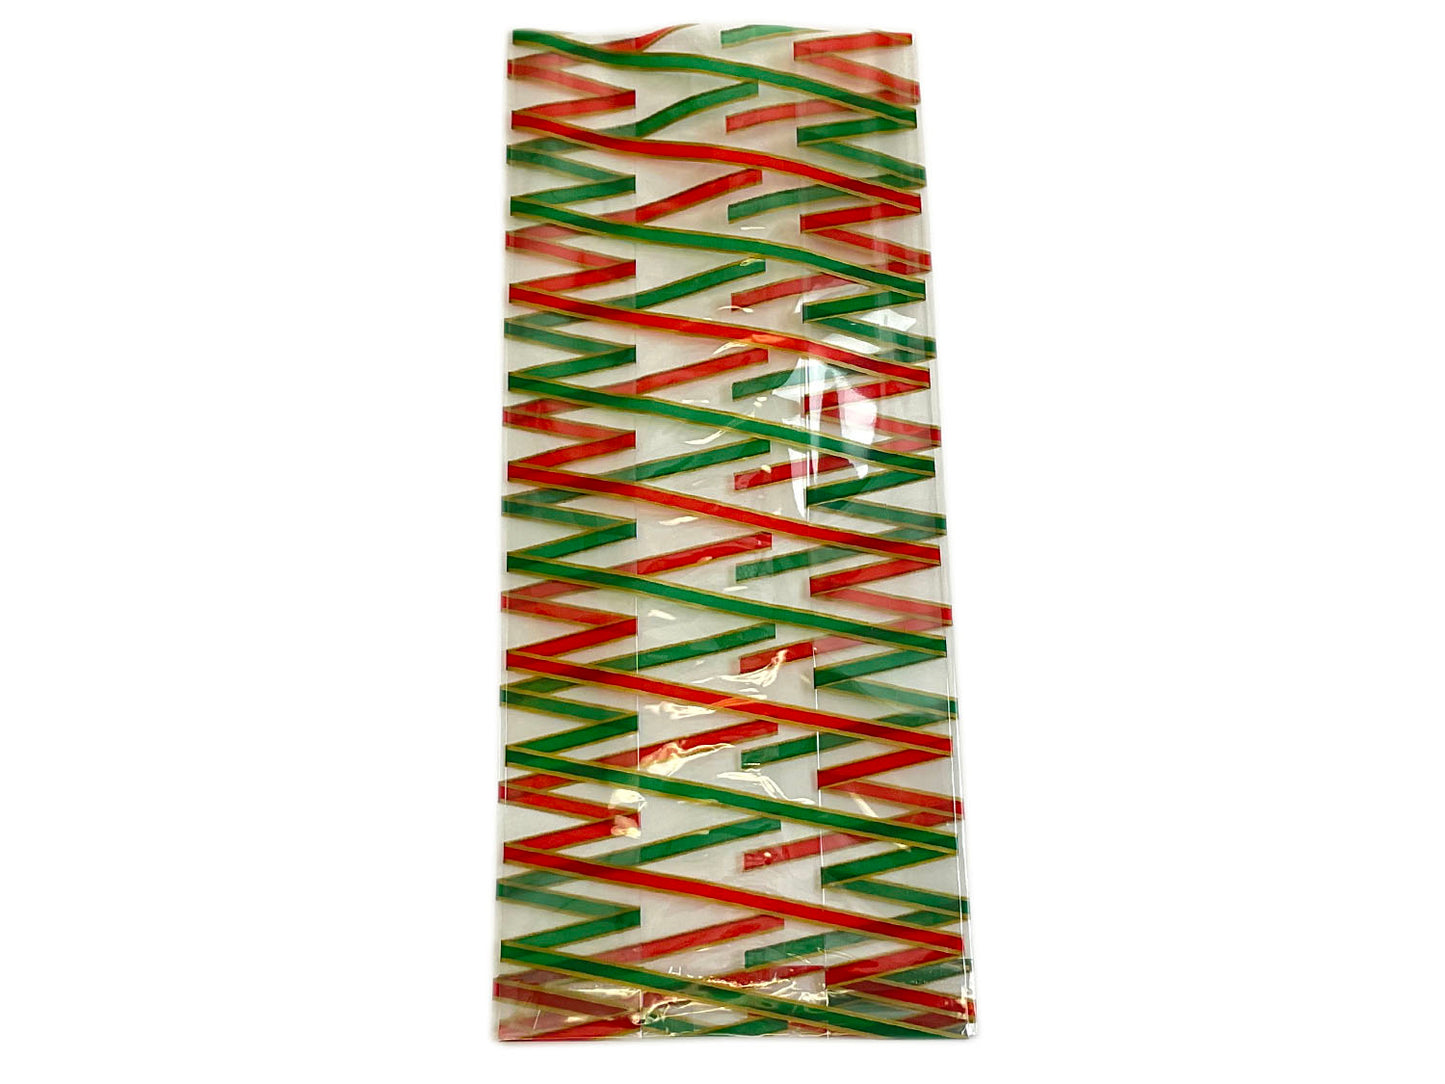 Party Favor Bag - Red and Green Stripes